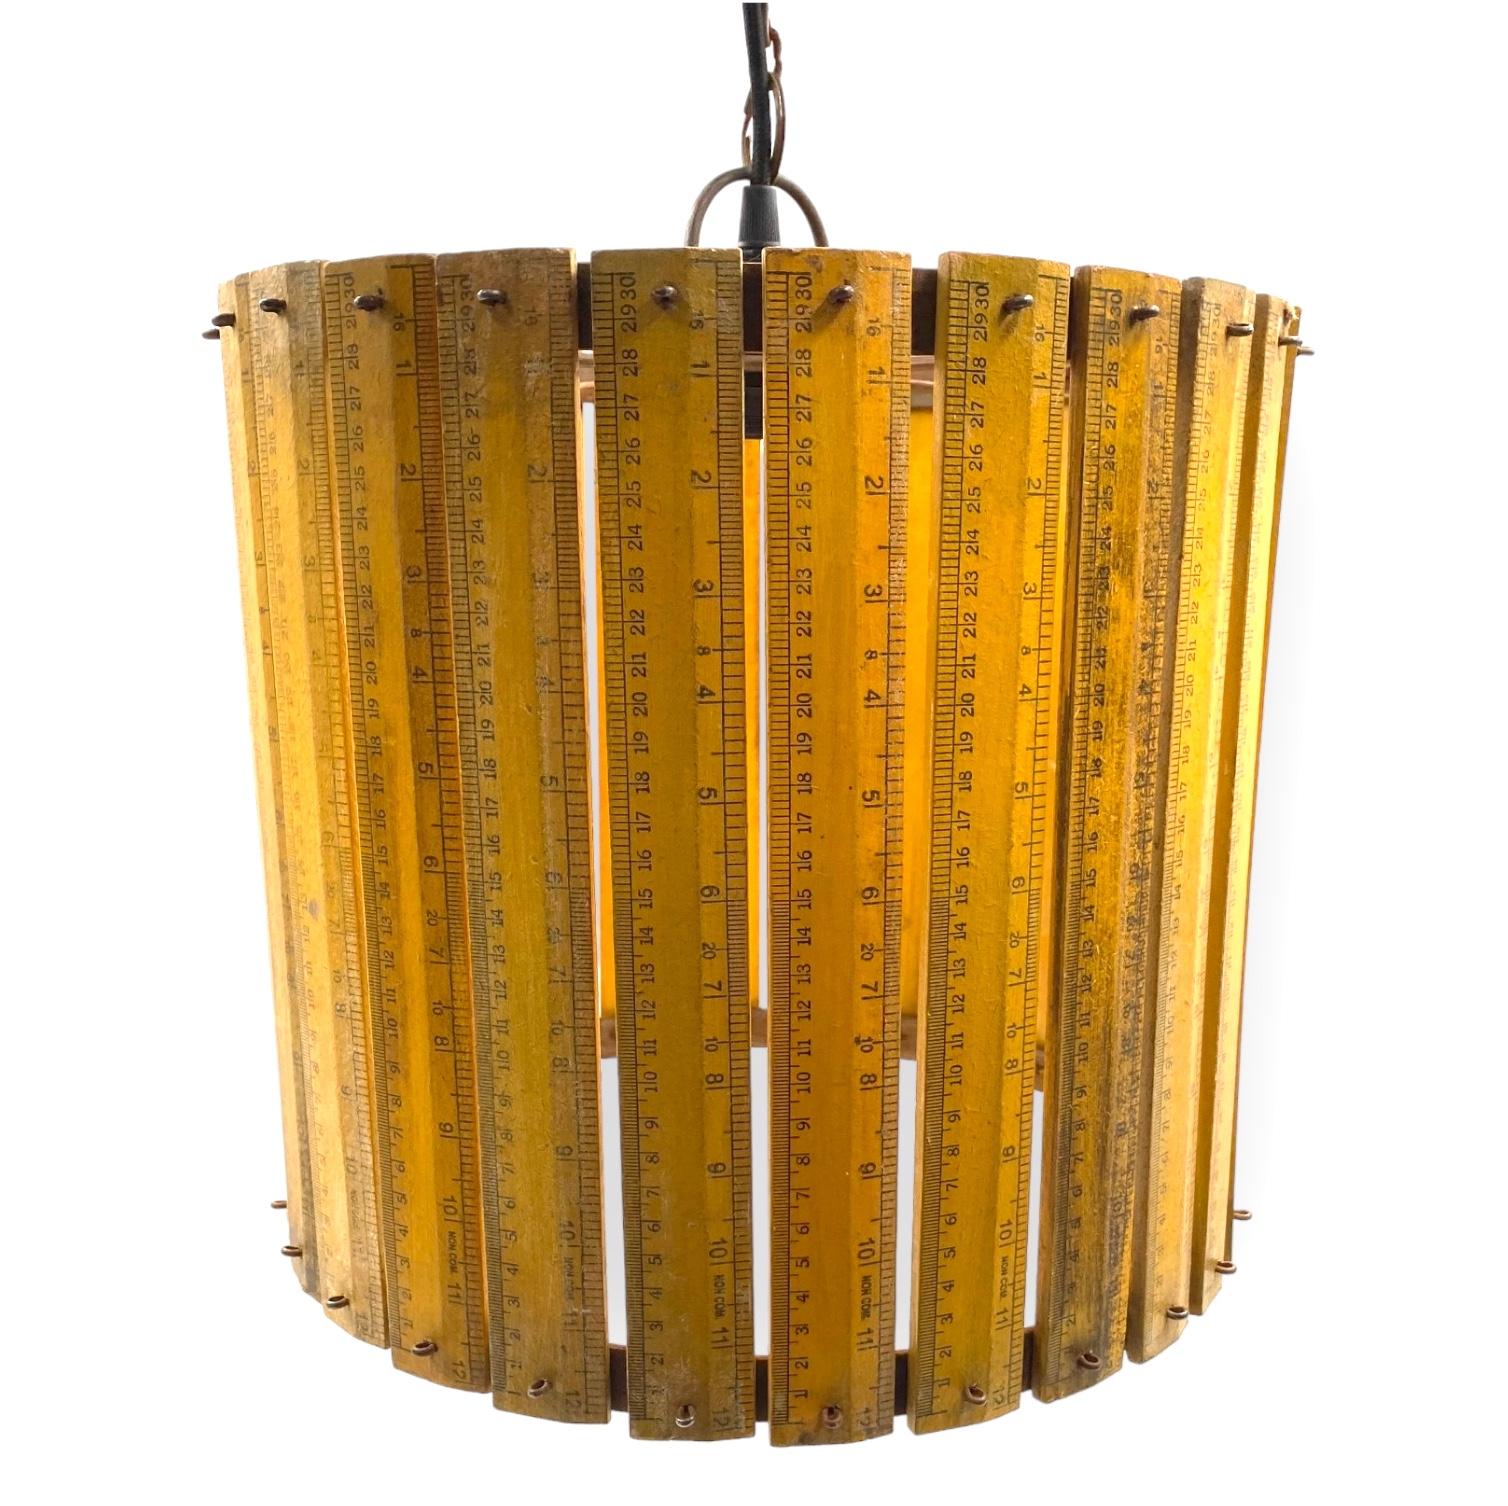 Modern artisanal rulers shaped ceiling lamp

France 1960s

yellow wood rulers, metal structure

32 cm H - diam. 34 cm

Conditions: good consistent with age and use